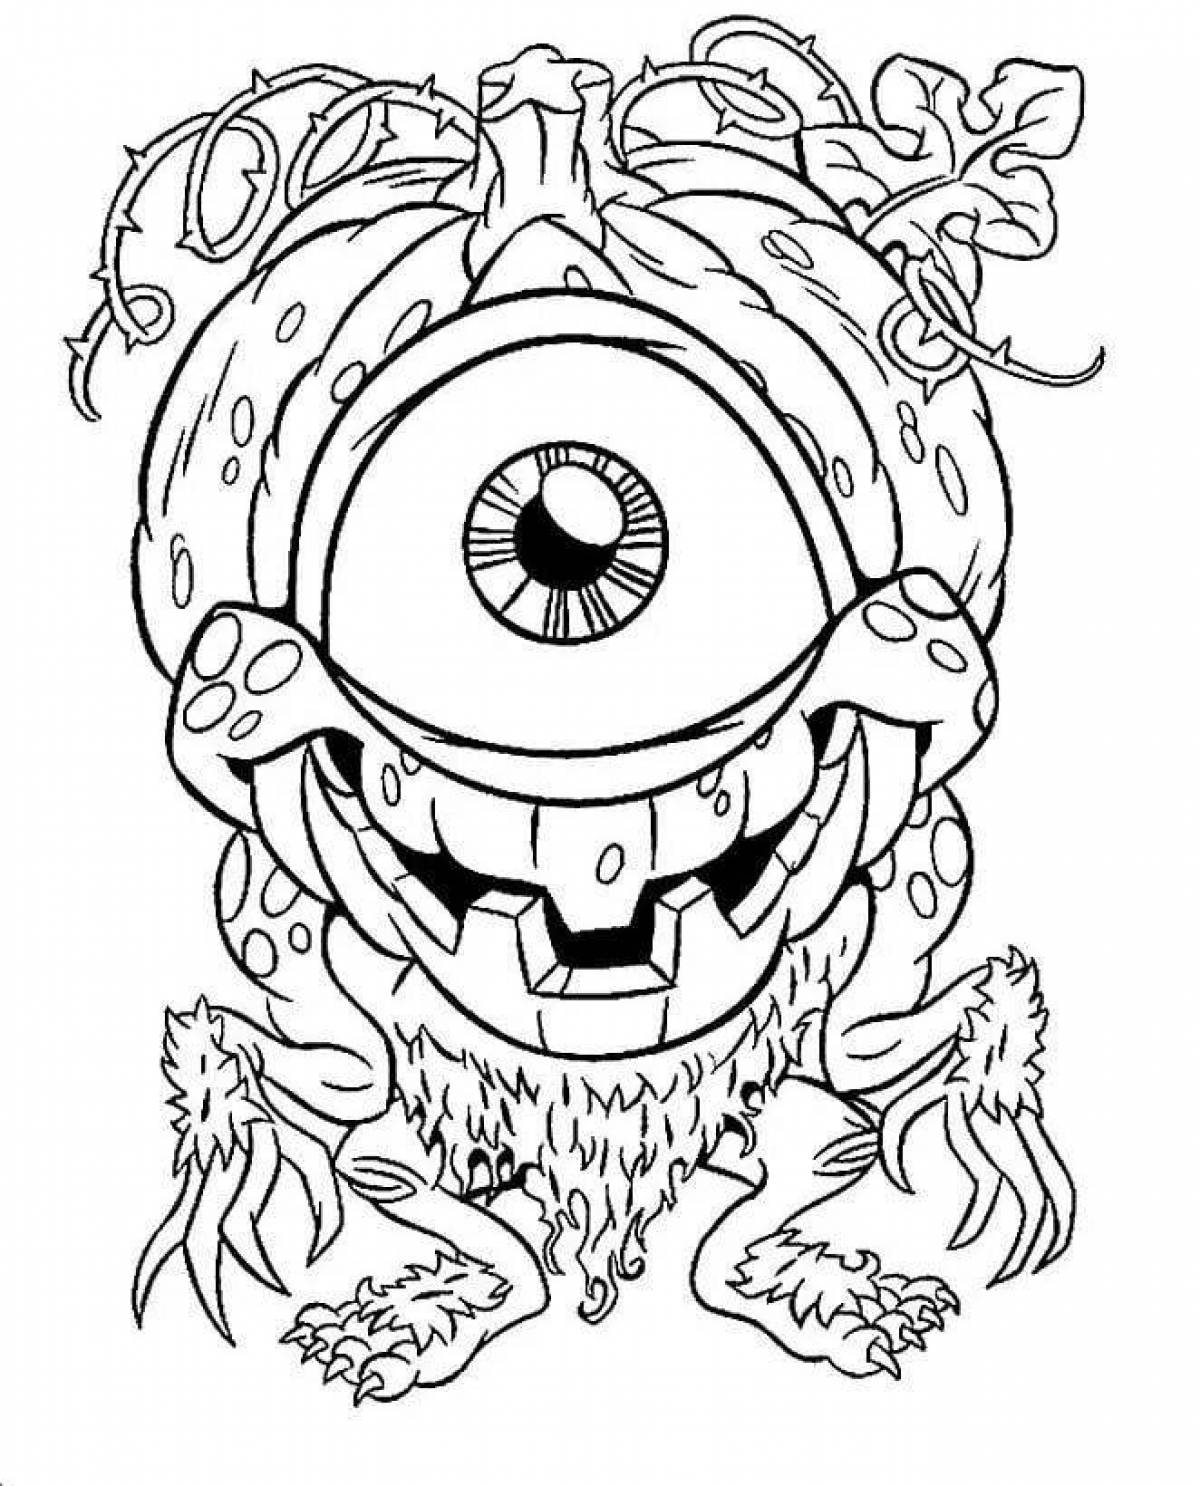 Coloring page chilling scary monsters